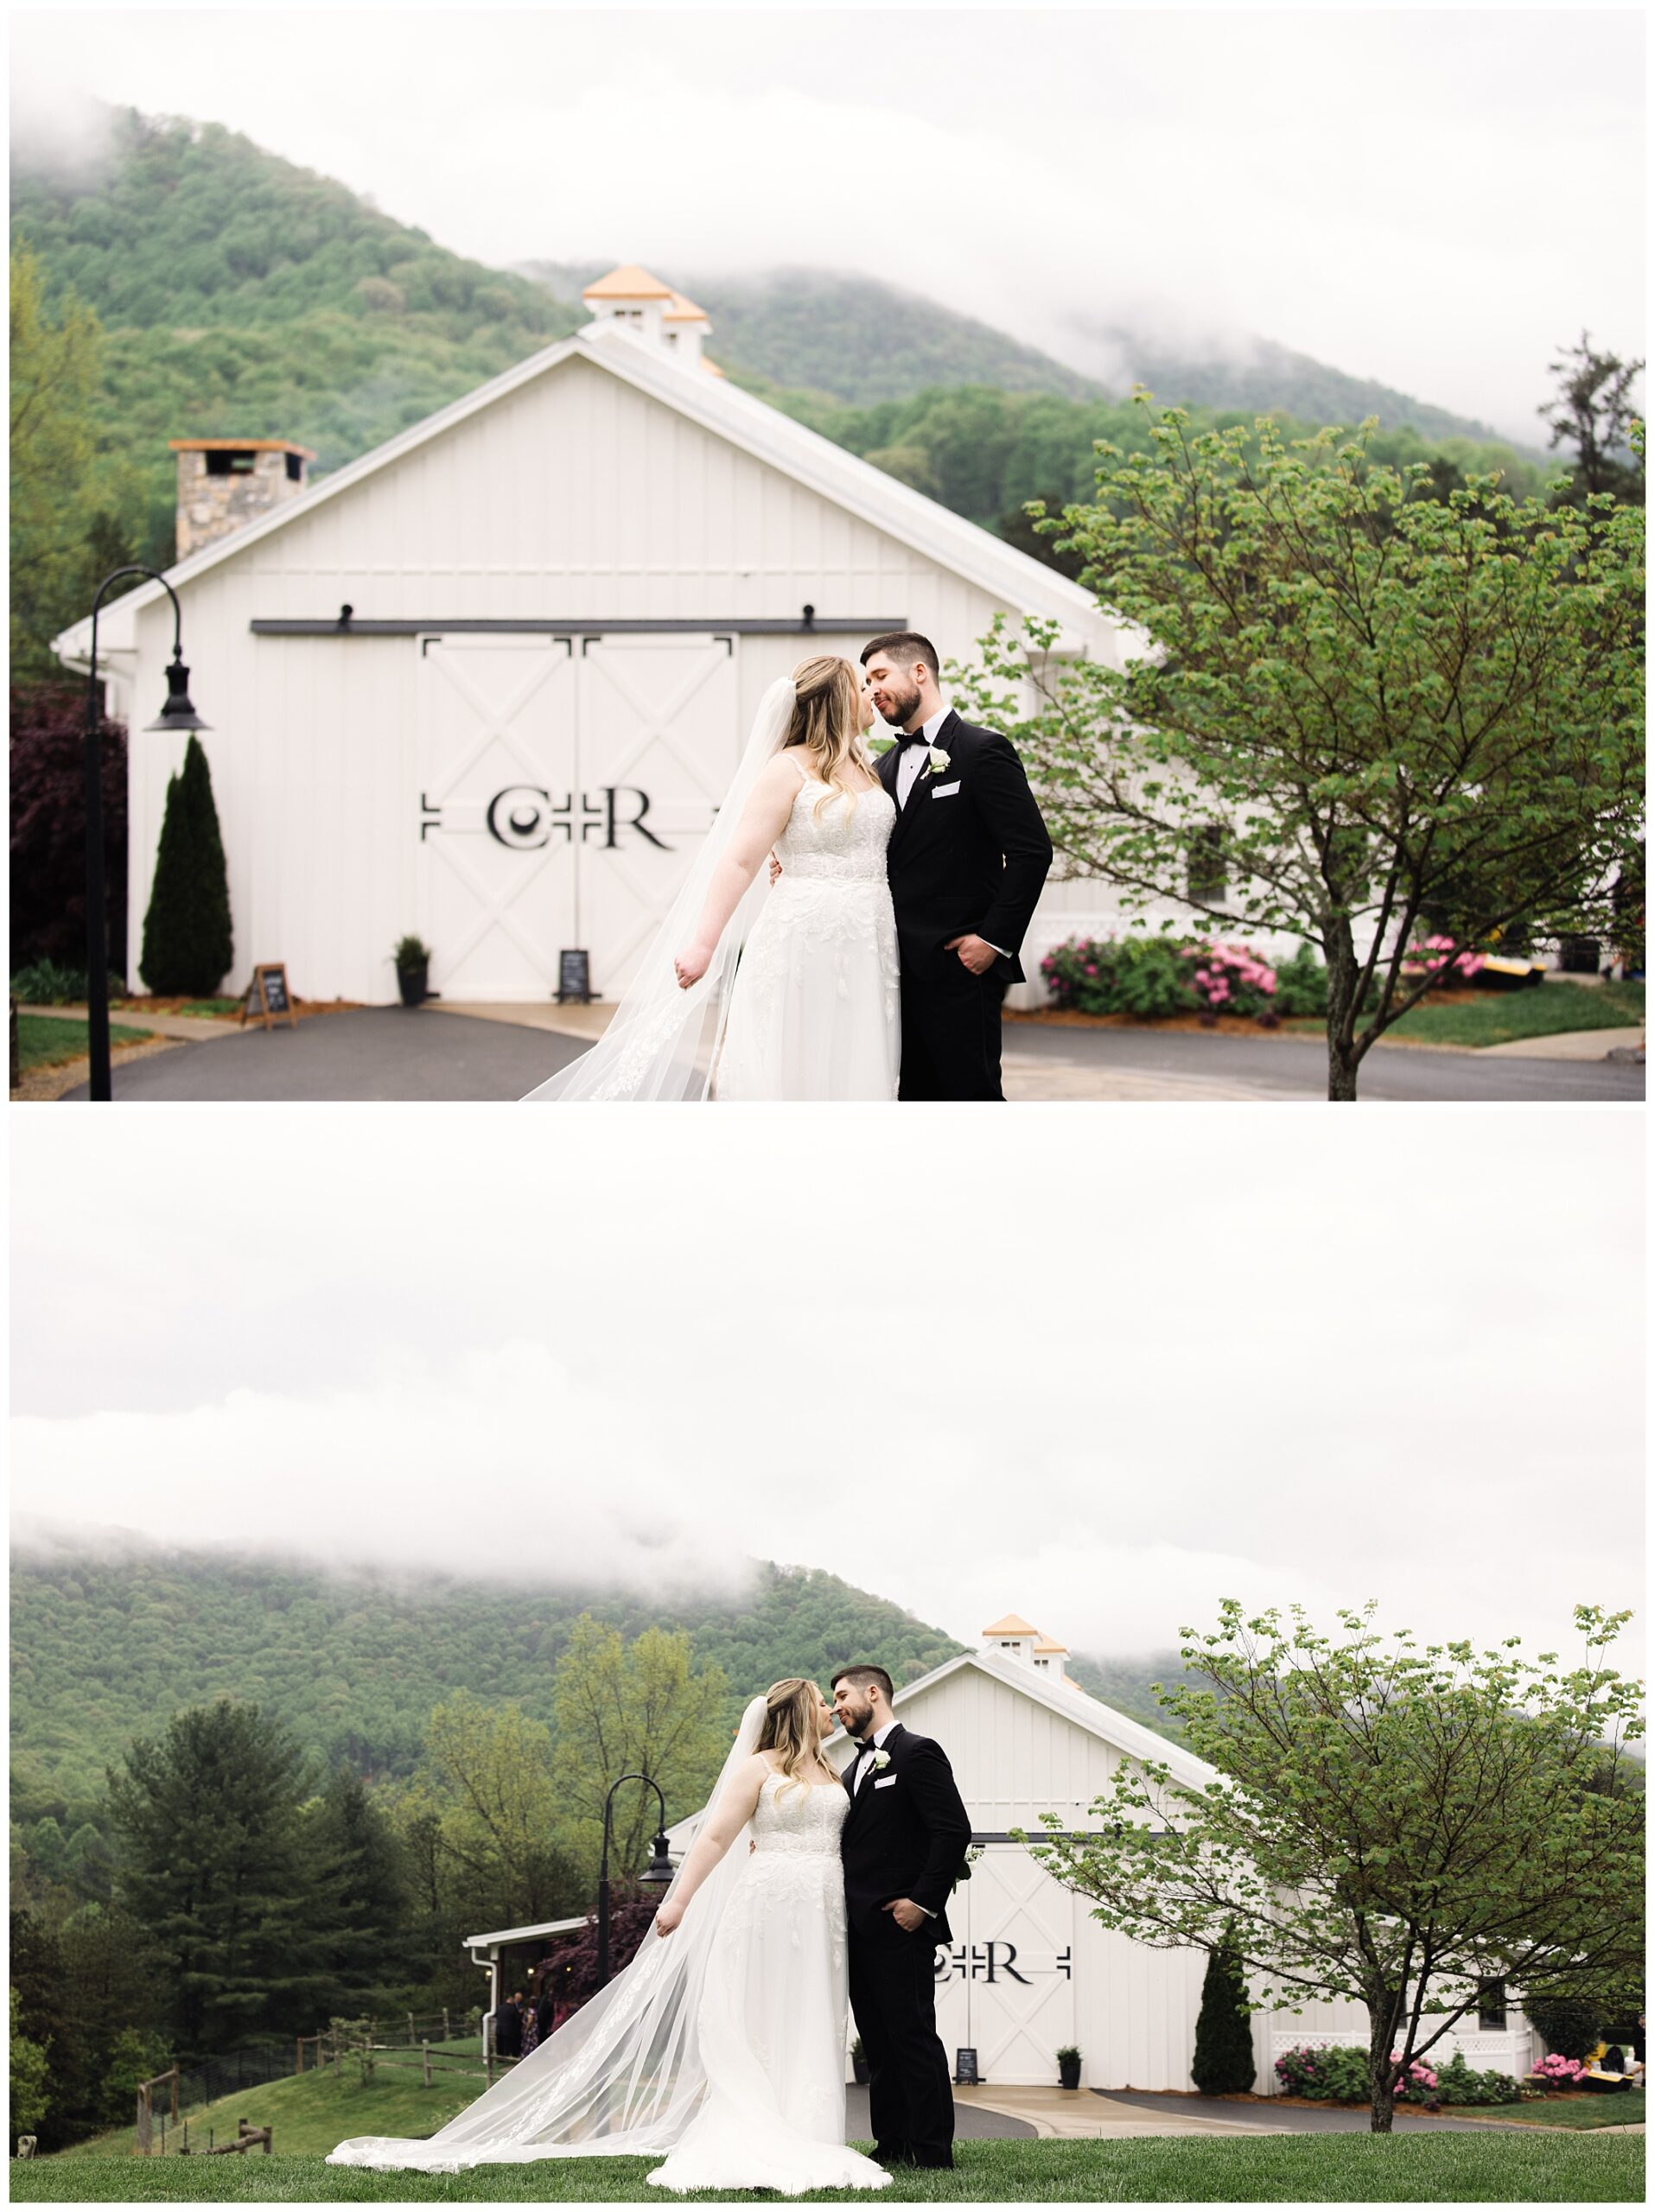 A bride and groom embracing in front of a white barn, with misty mountains in the background at Chestnut Ridge. mountain wedding rain at chestnut ridge
